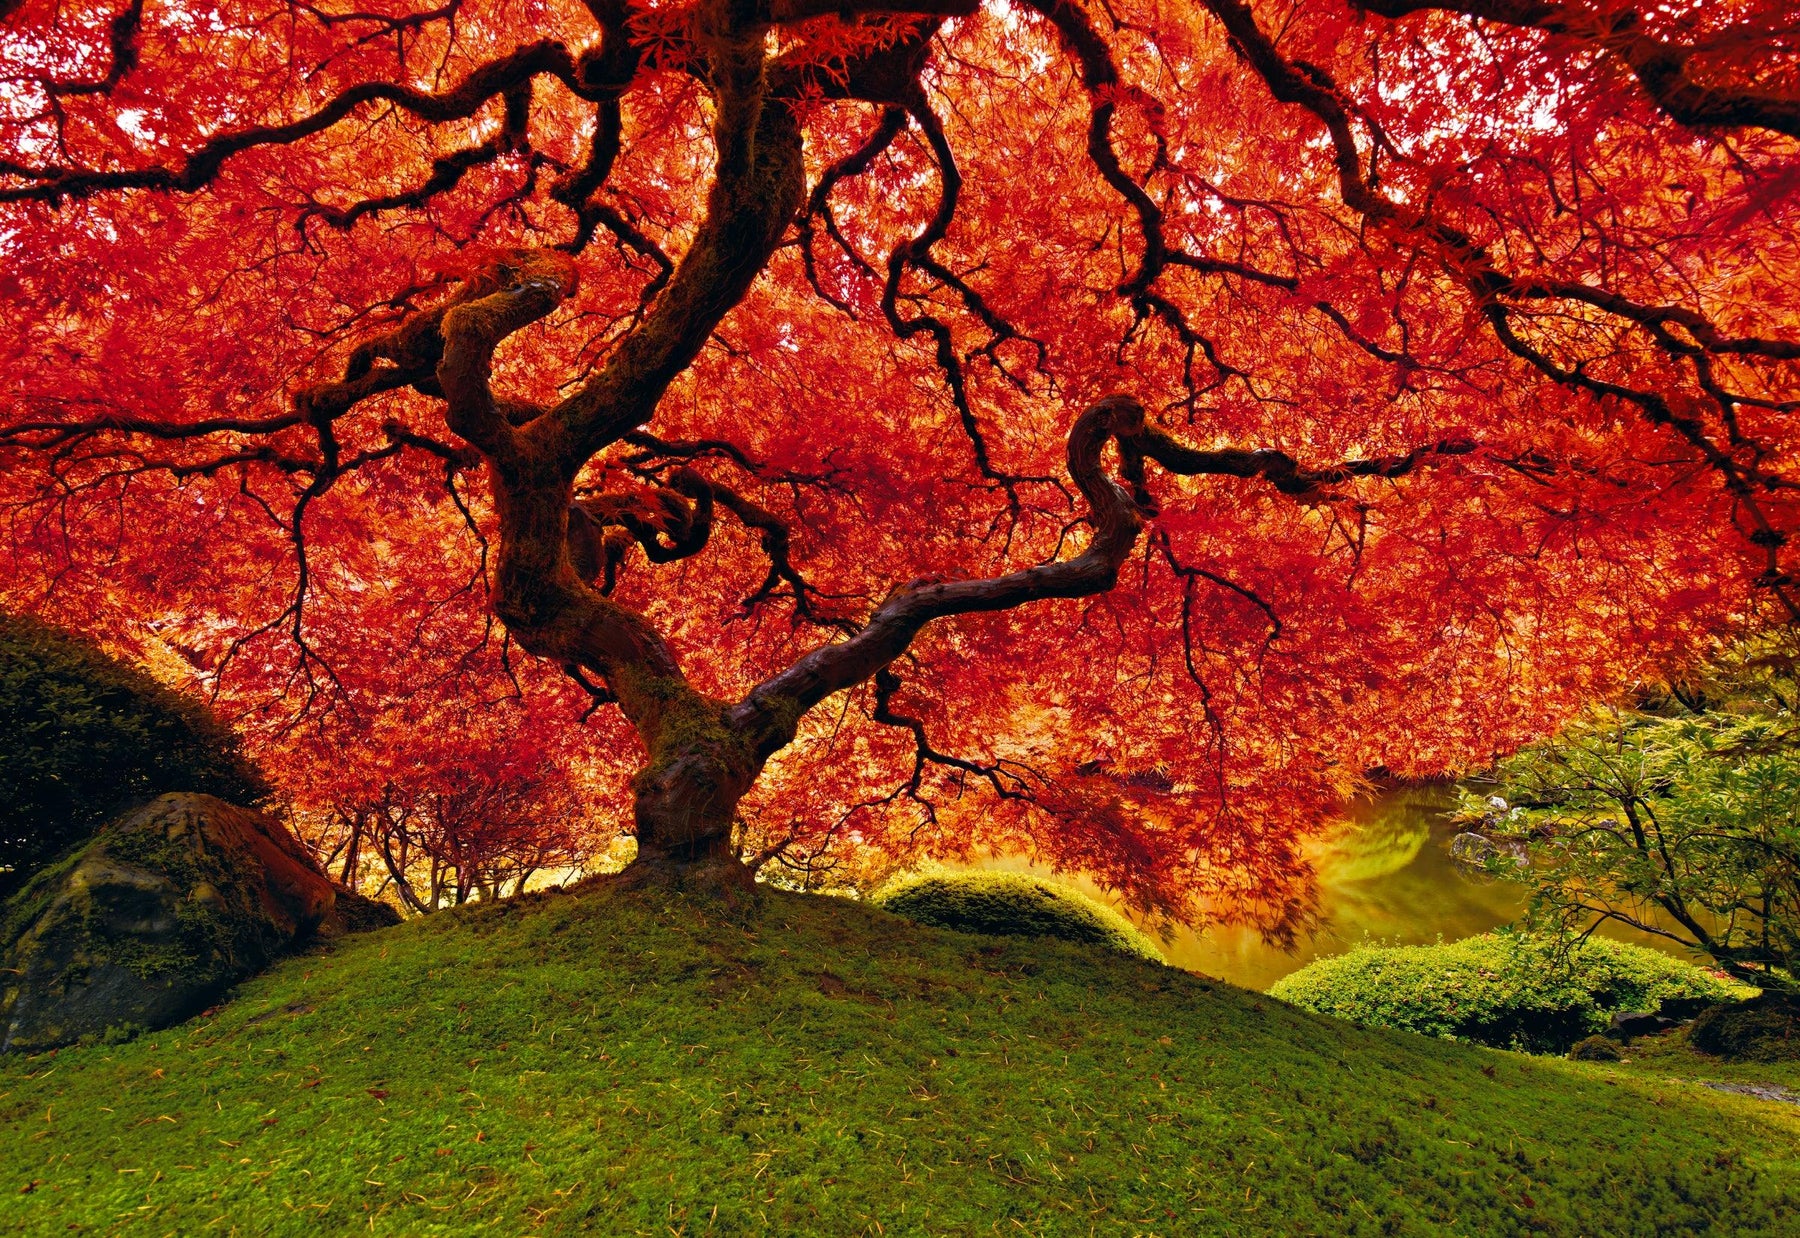 Red leaf Japanese Maple tree on a grass hill near a pond in Oregon